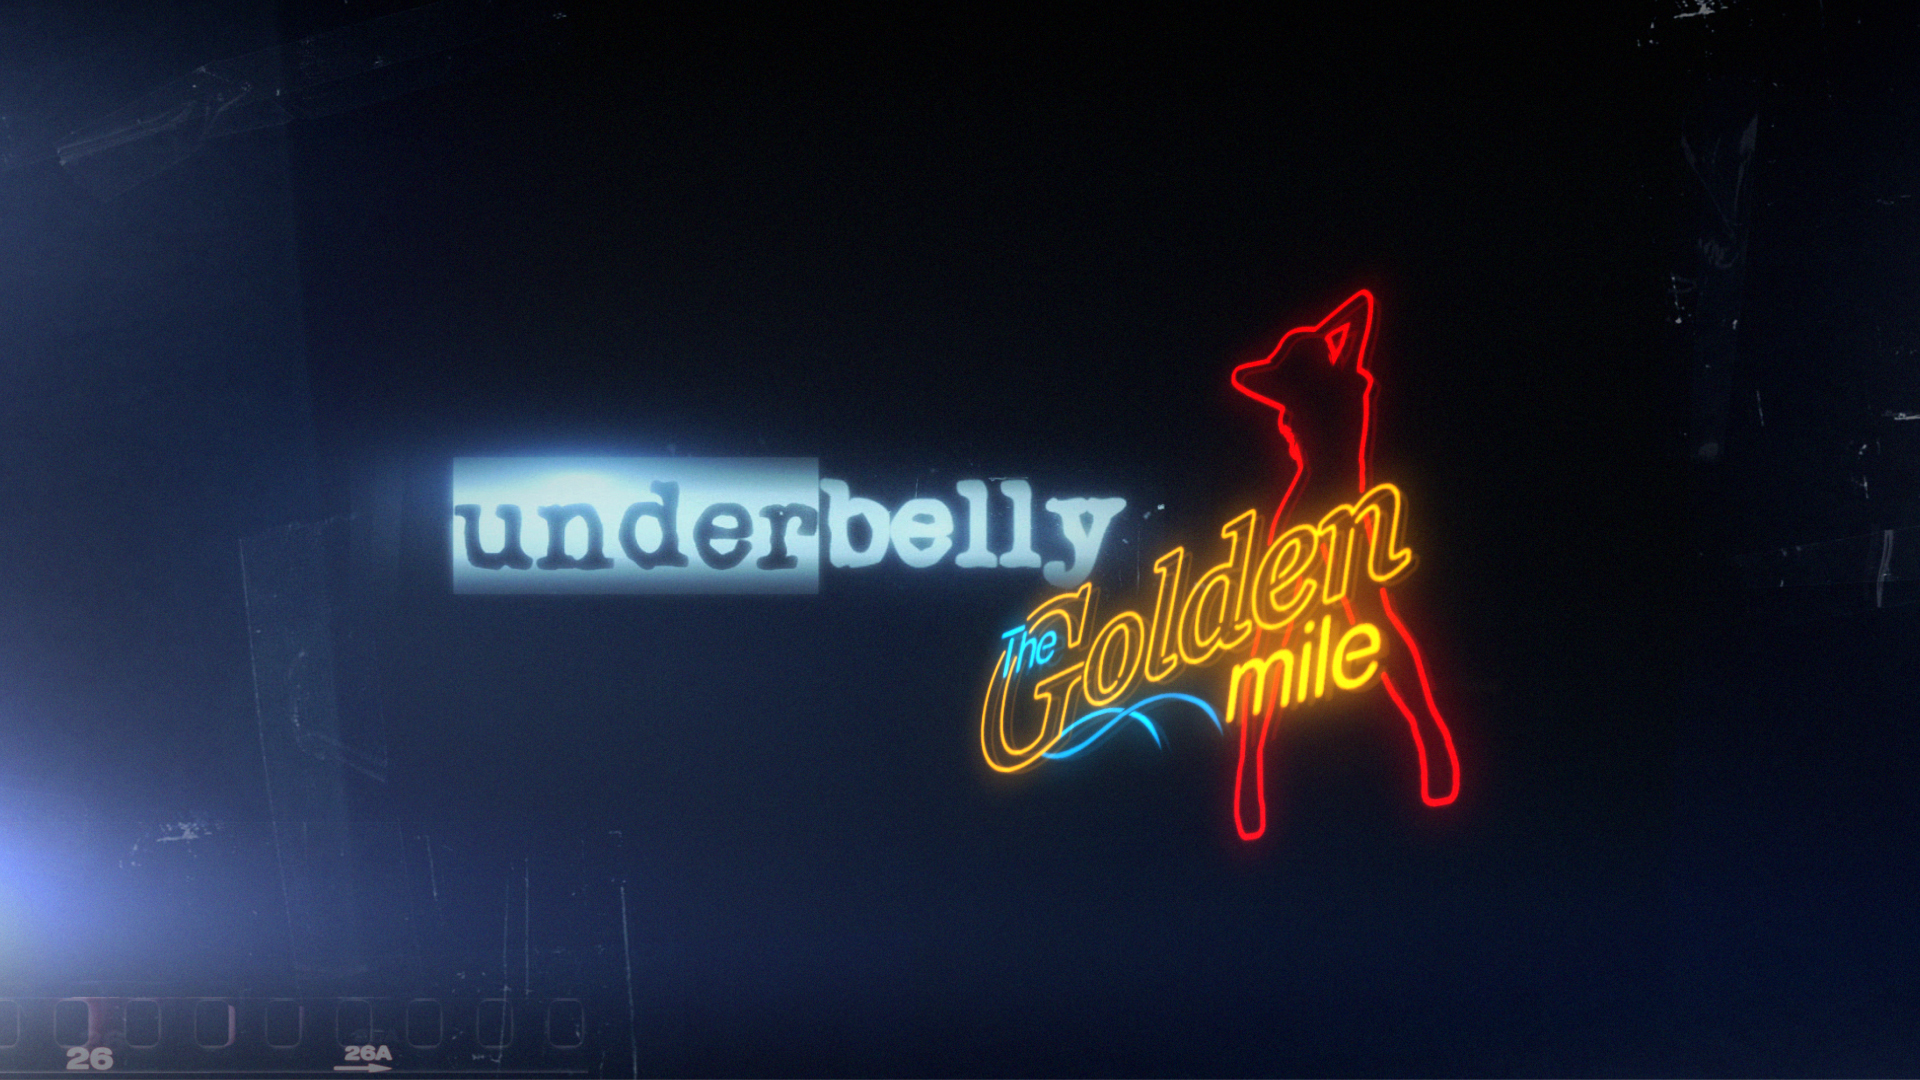 Underbelly Wallpapers